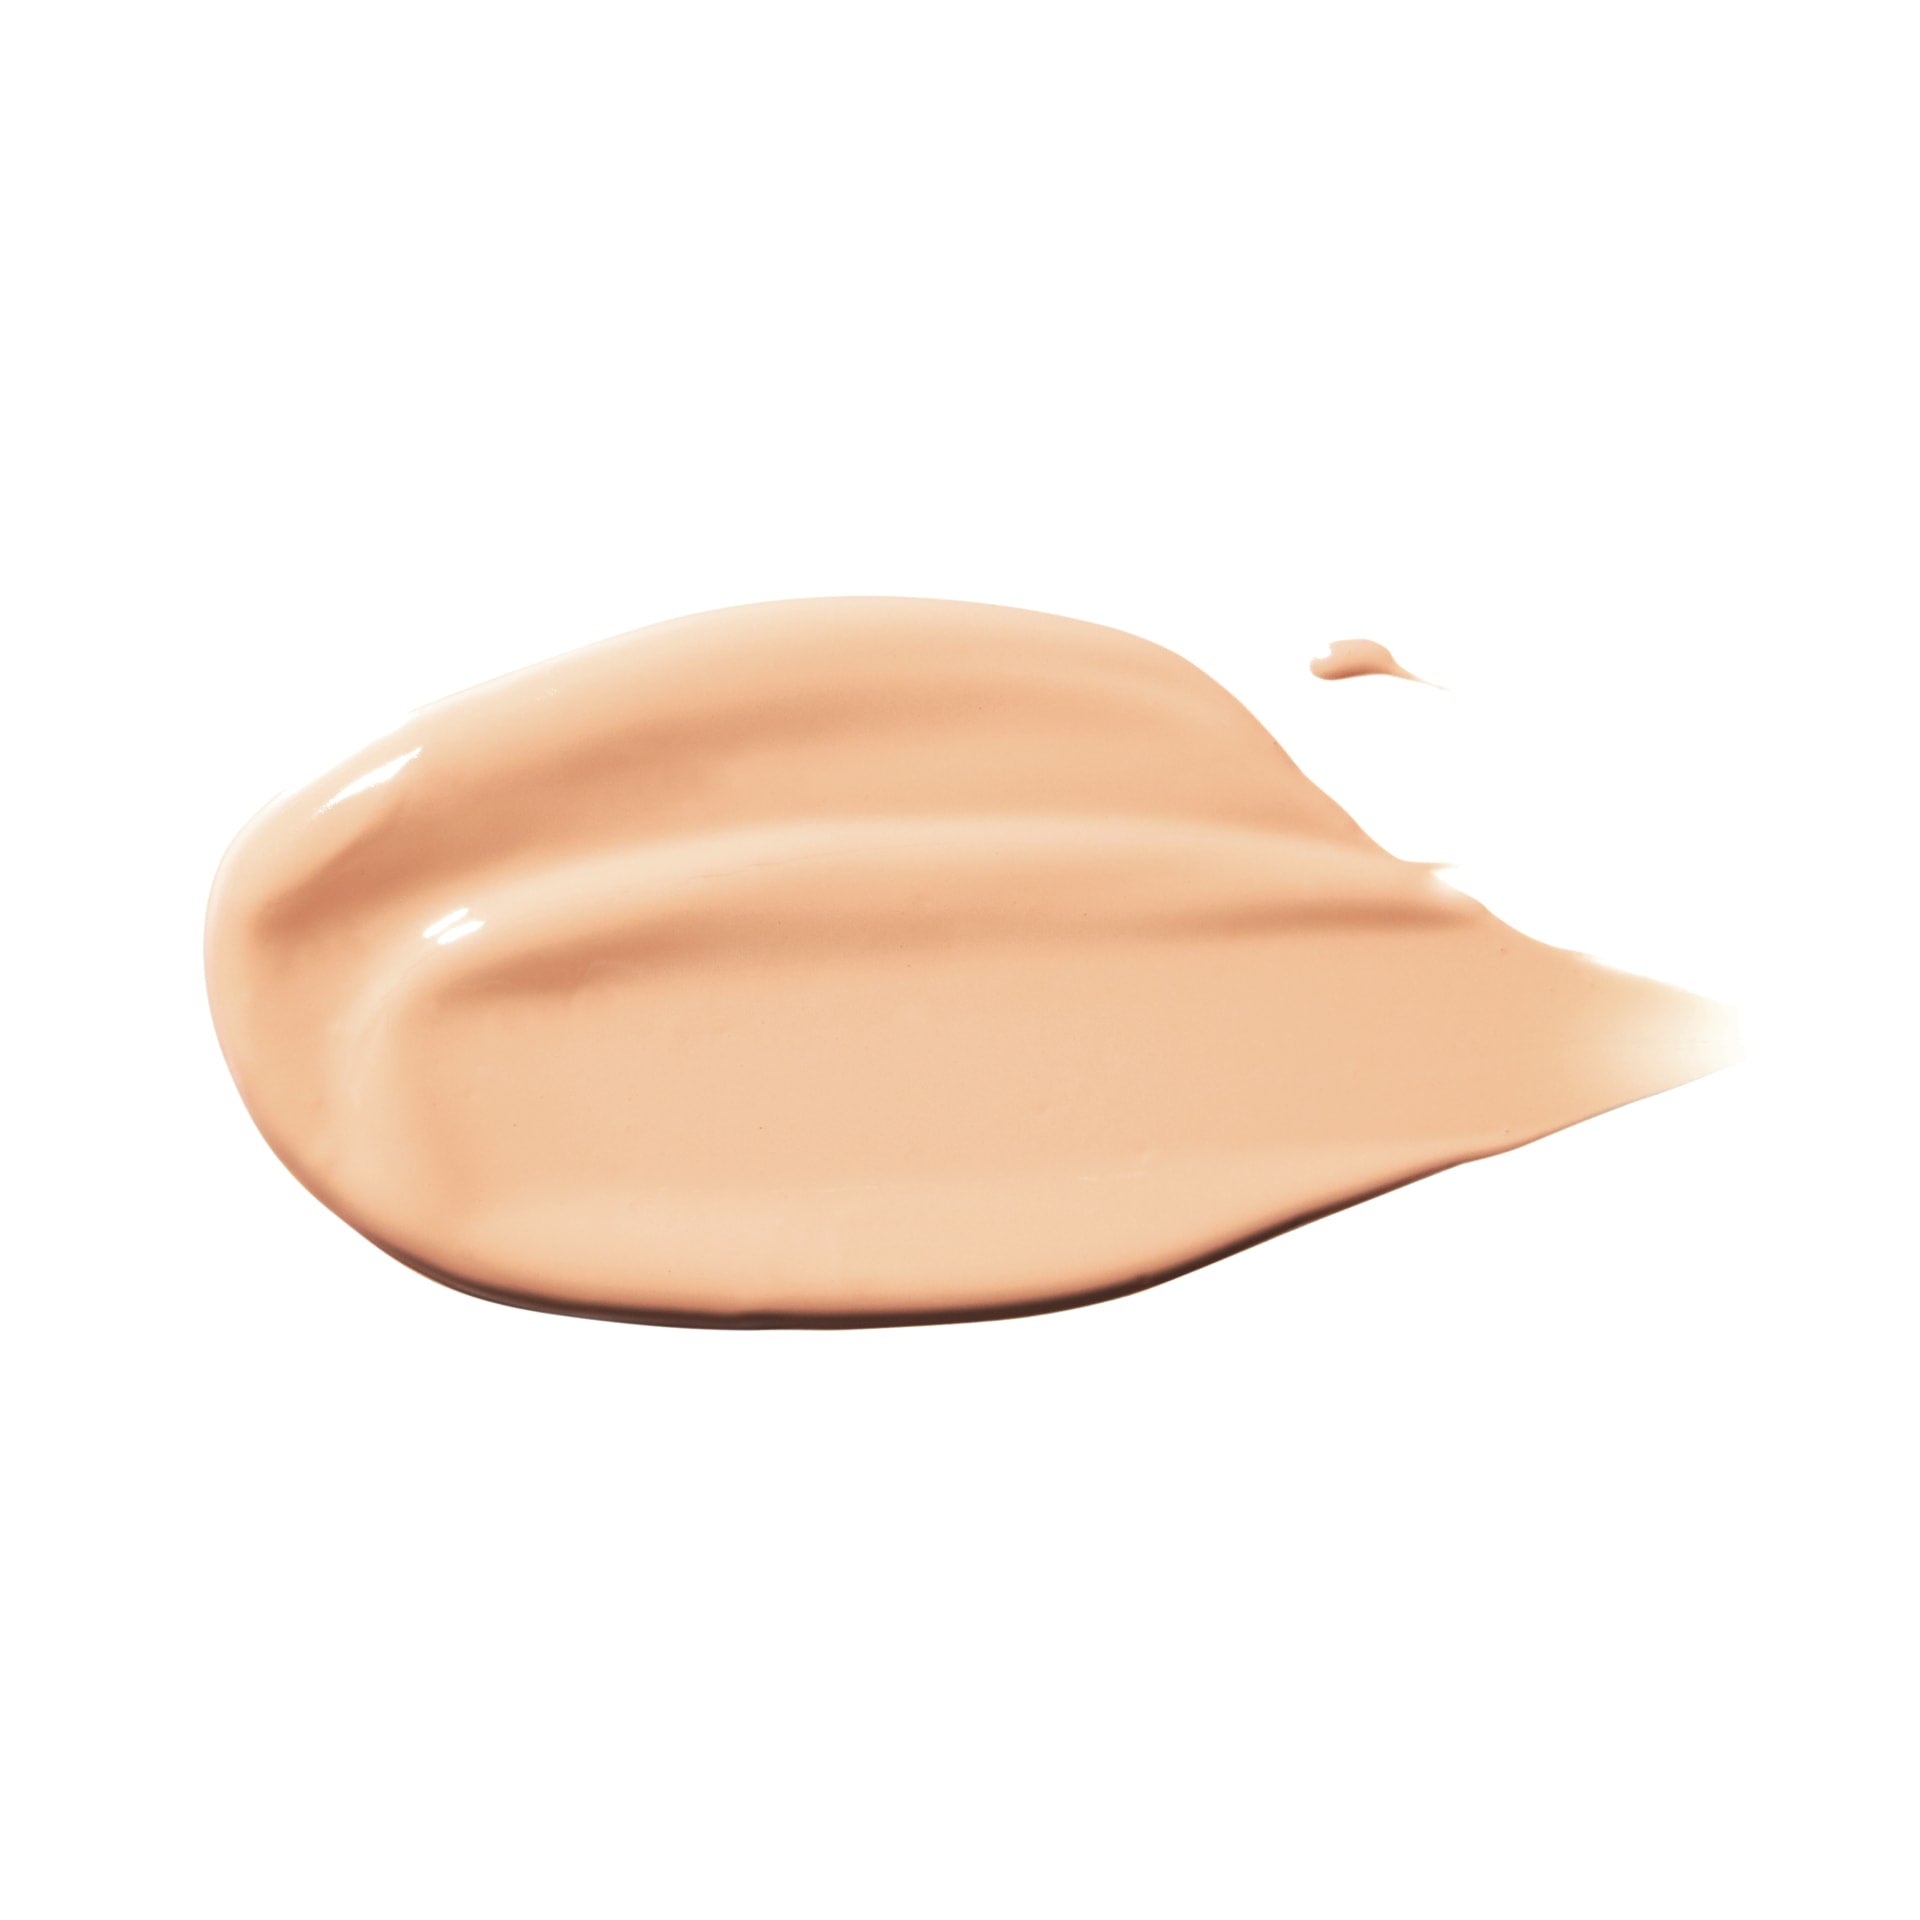 100% PURE Fruit Pigmented Healthy Foundation alpine rose